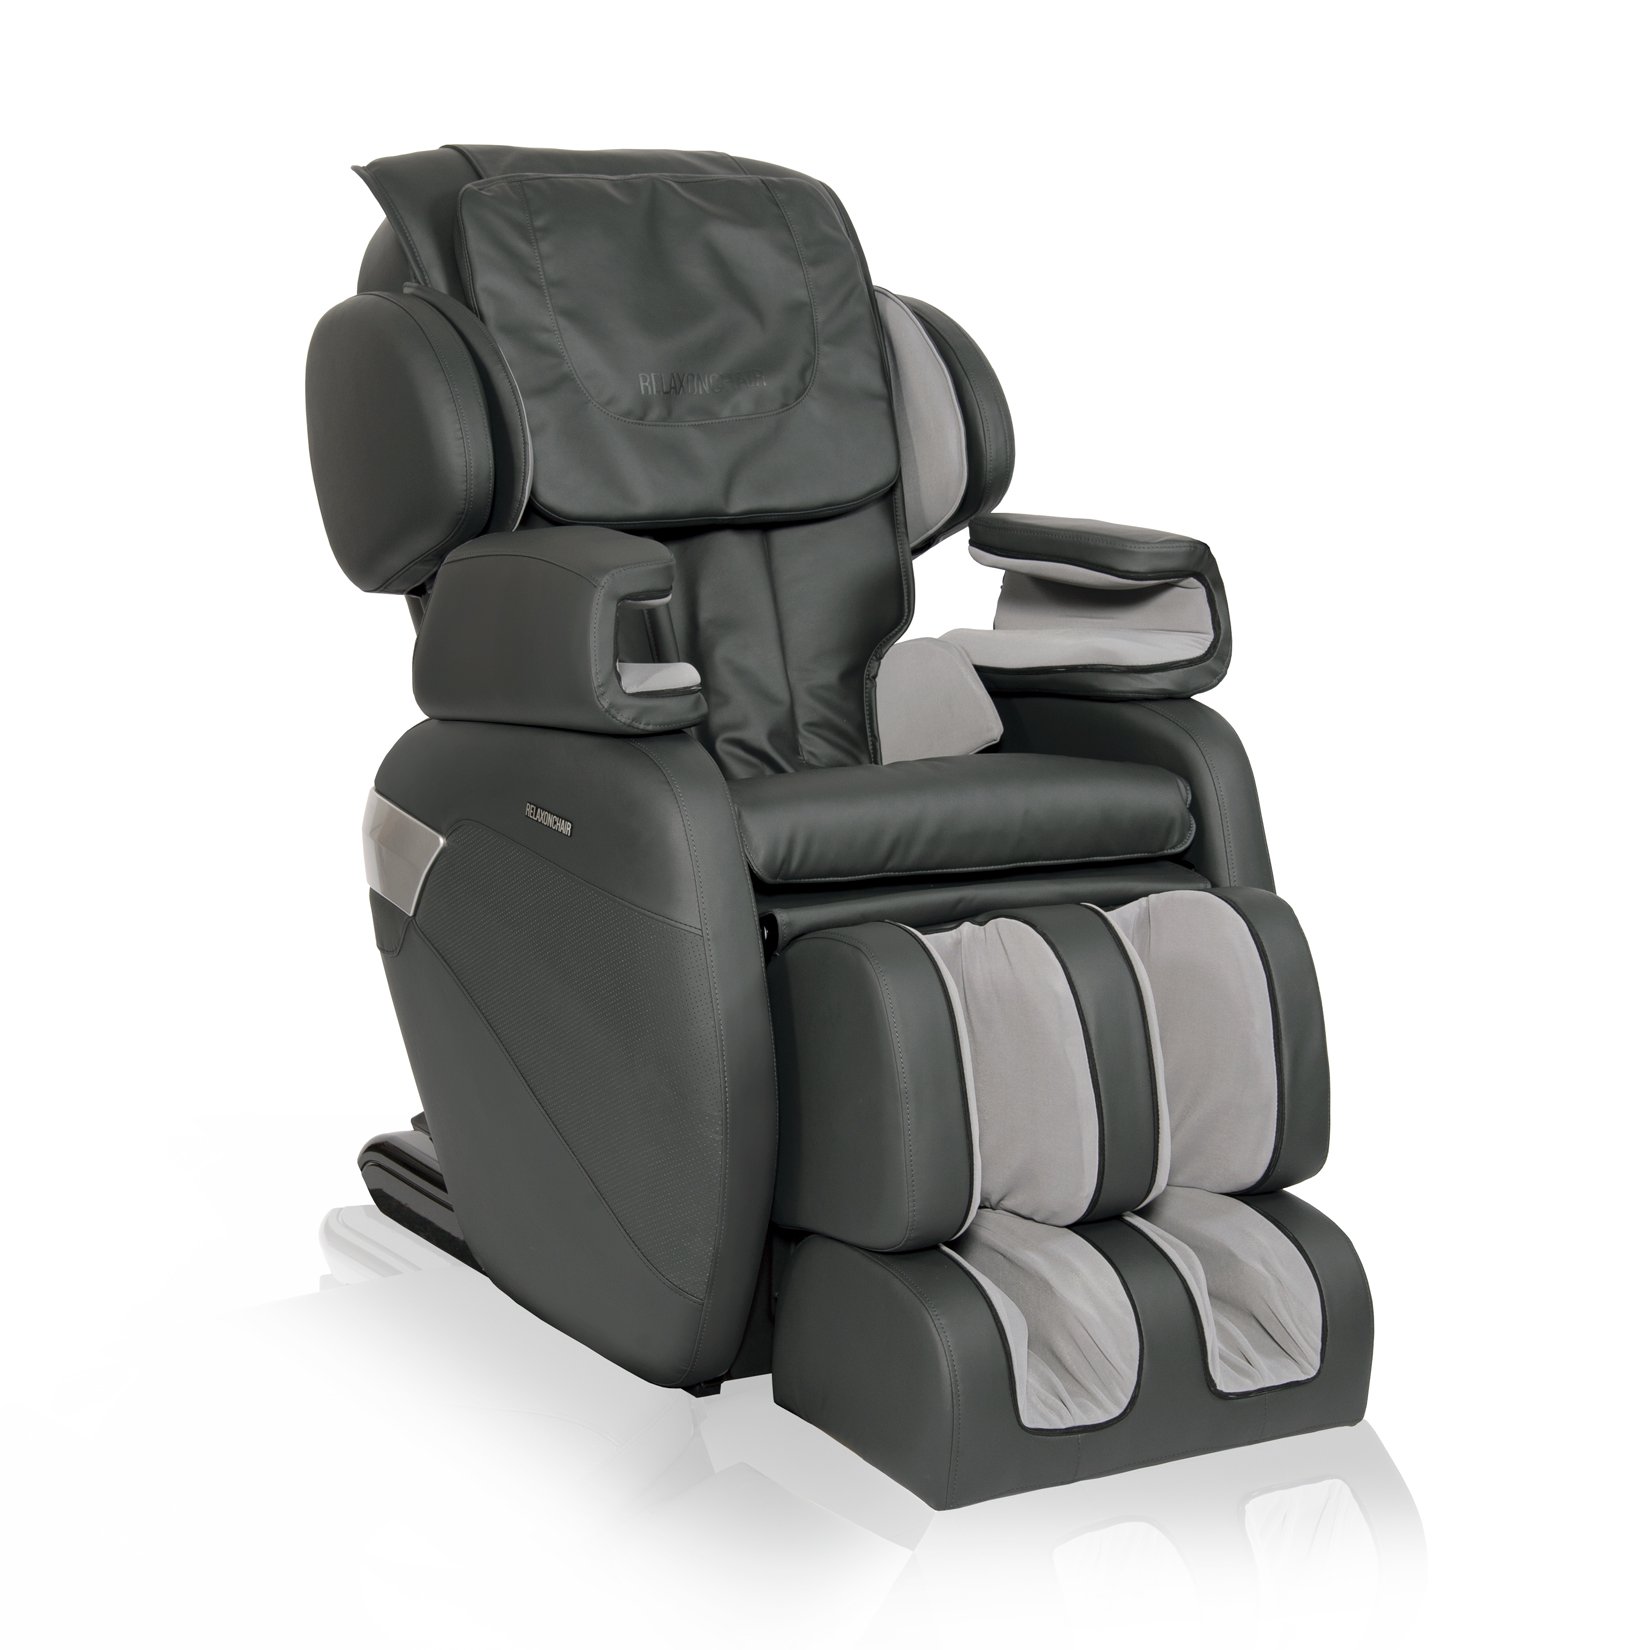 RELAXONCHAIR Full Body Massage Chair, MK-II PLUS - Charcoal (Gray) - image 5 of 8